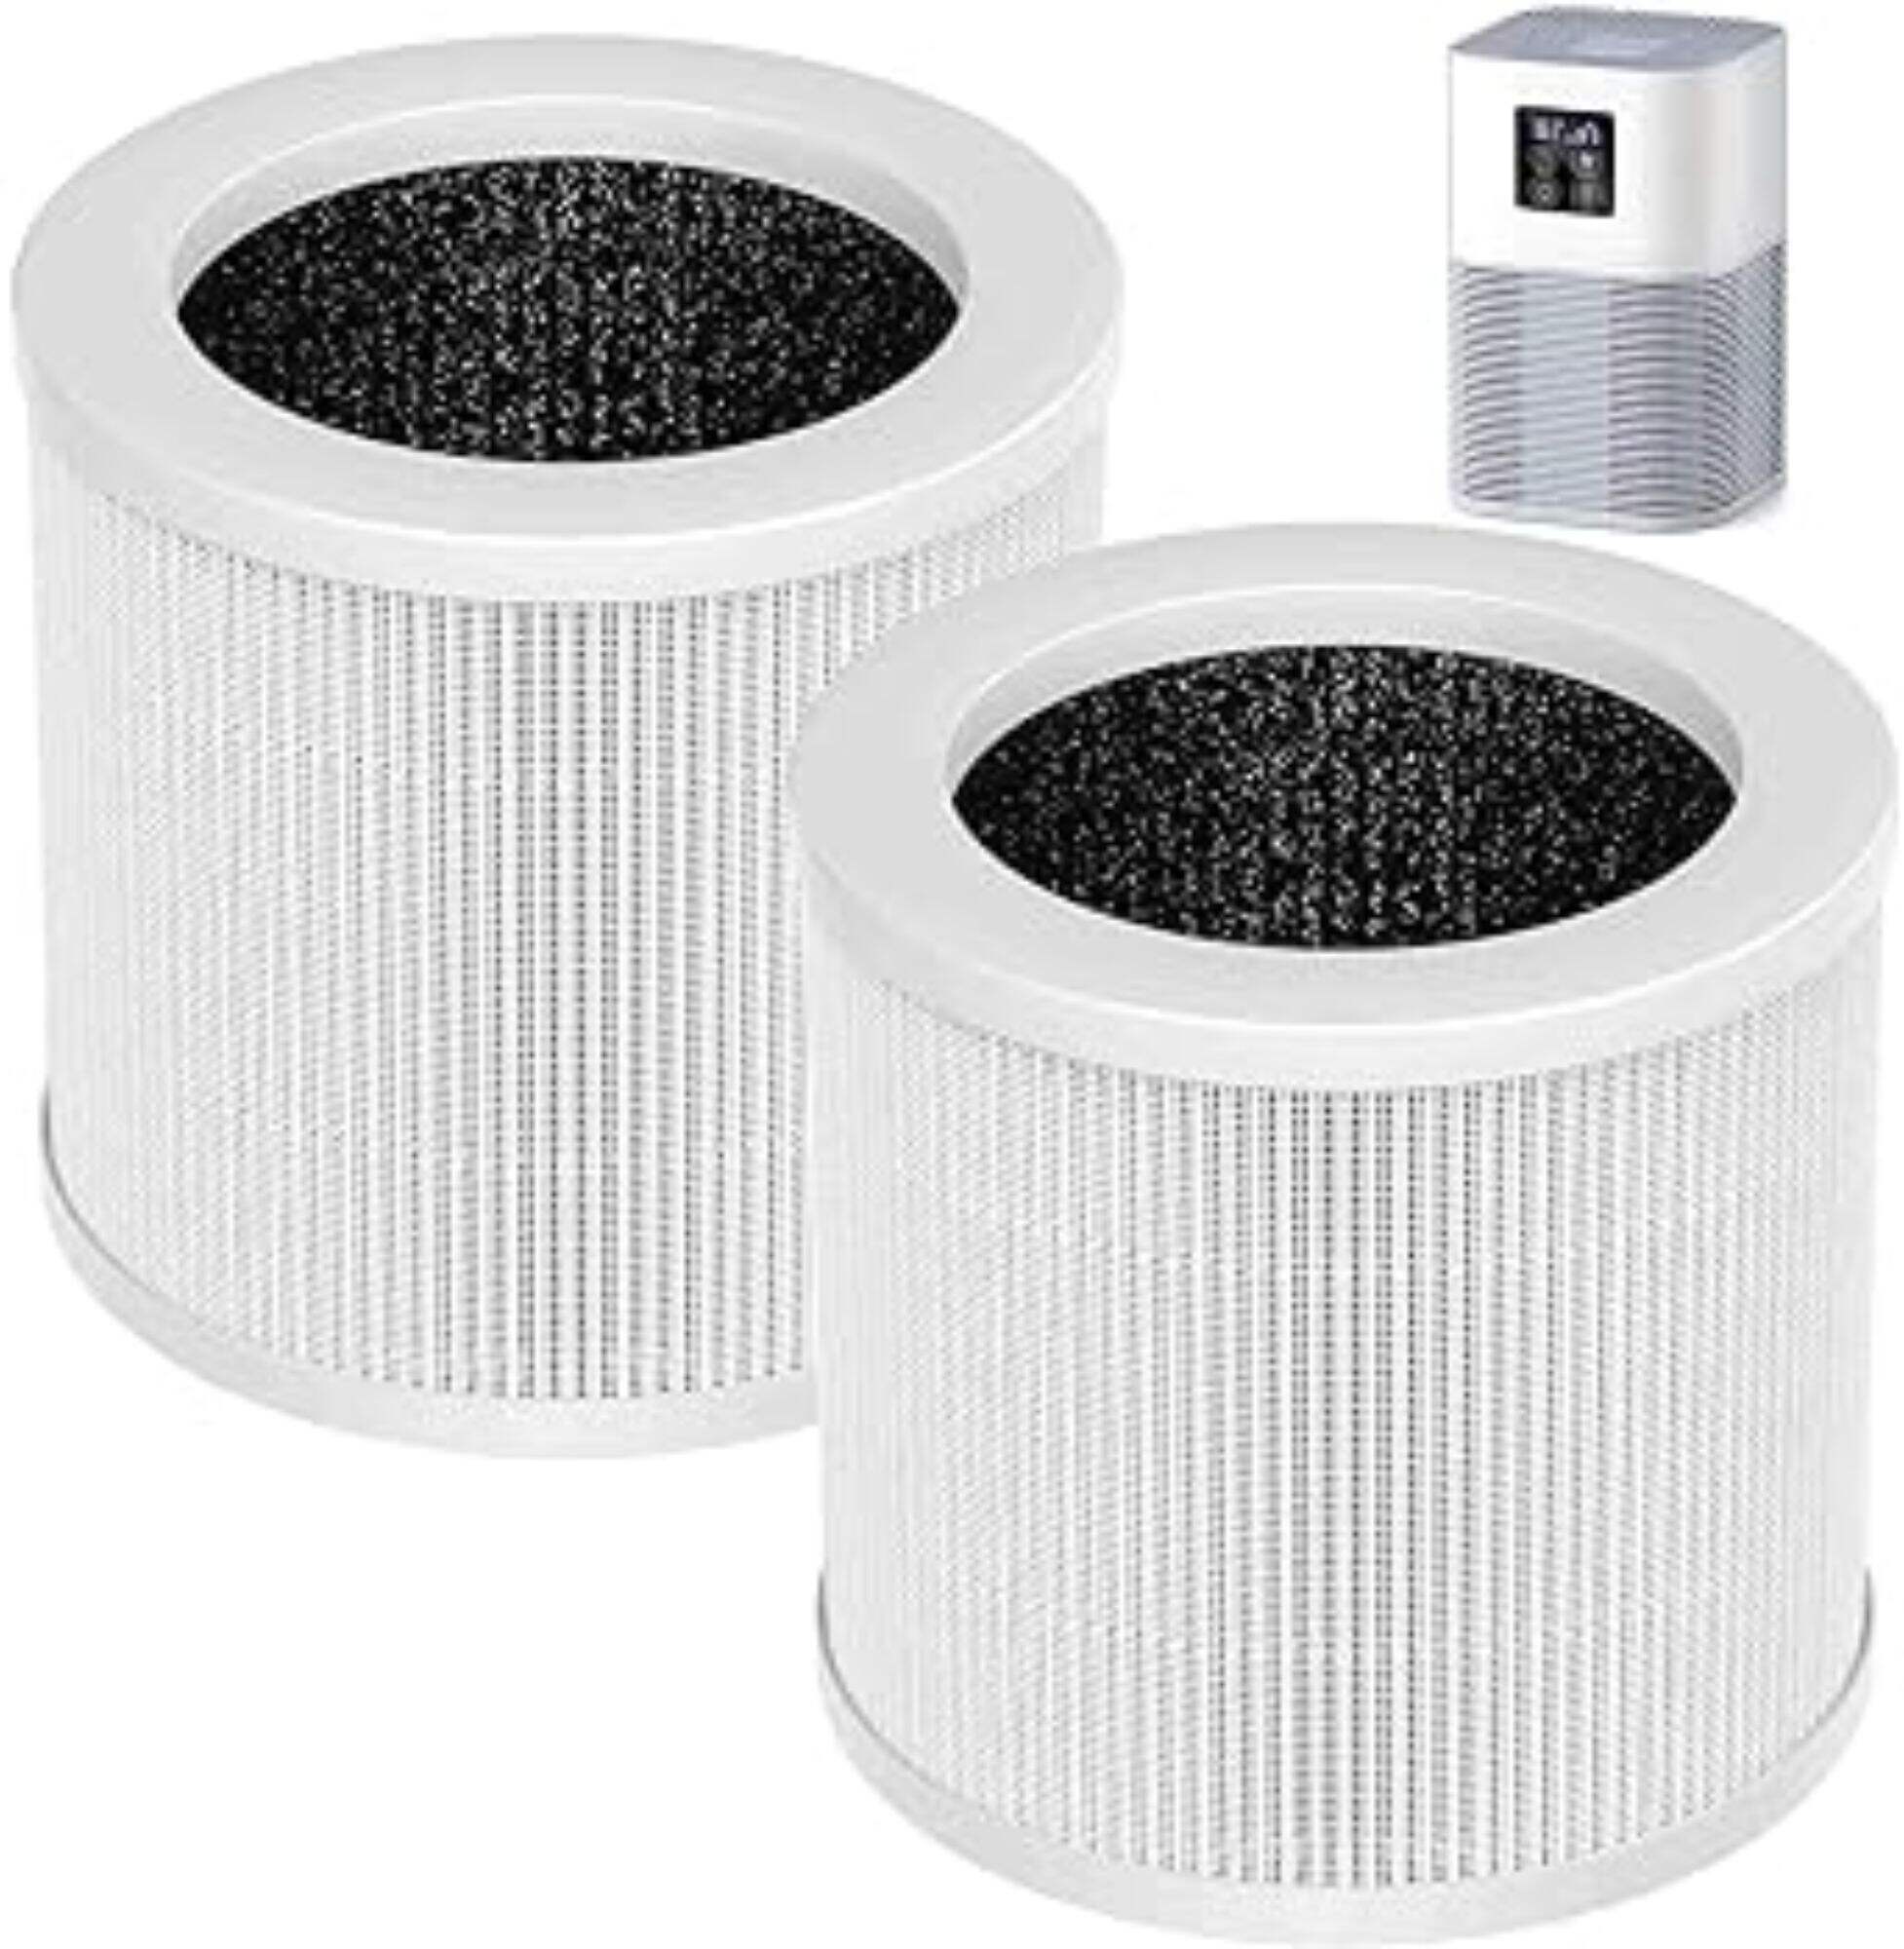 Competitive Price Cylinder Air Purifier Filters Hepa Filter H11 H12 H13 Home Replacement